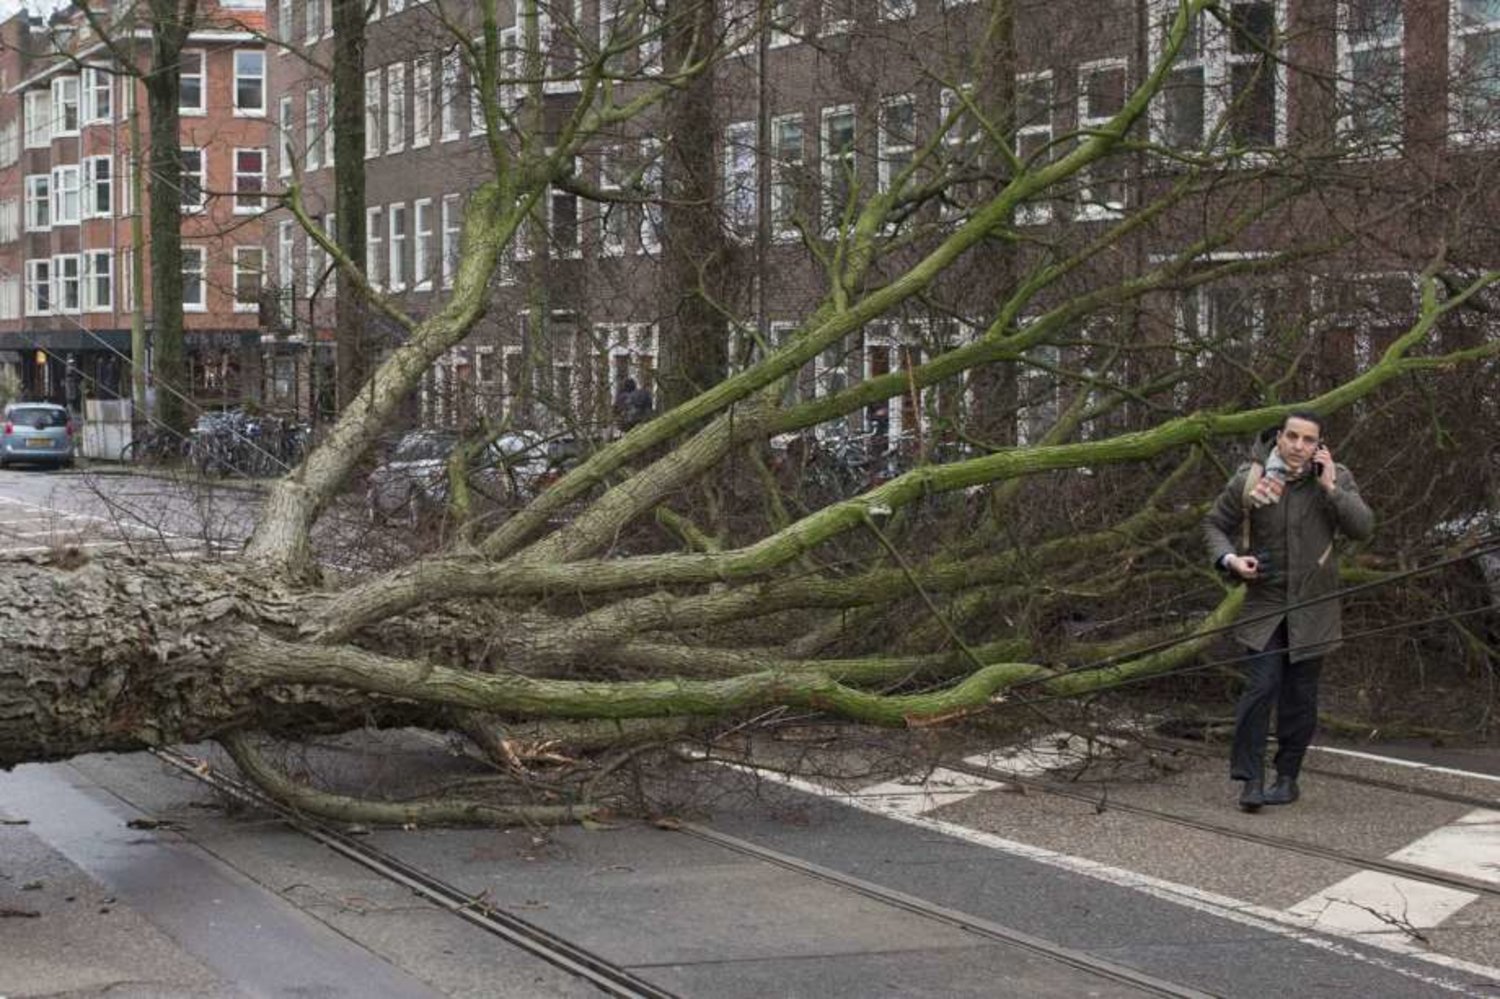 A man who escaped unharmed makes a phone call after his scooter was hit by a crashing tree uprooted by heavy winds in Amsterdam, Netherlands, Thursday, Jan. 18, 2018. Photo: AP Photo/Peter Dejong